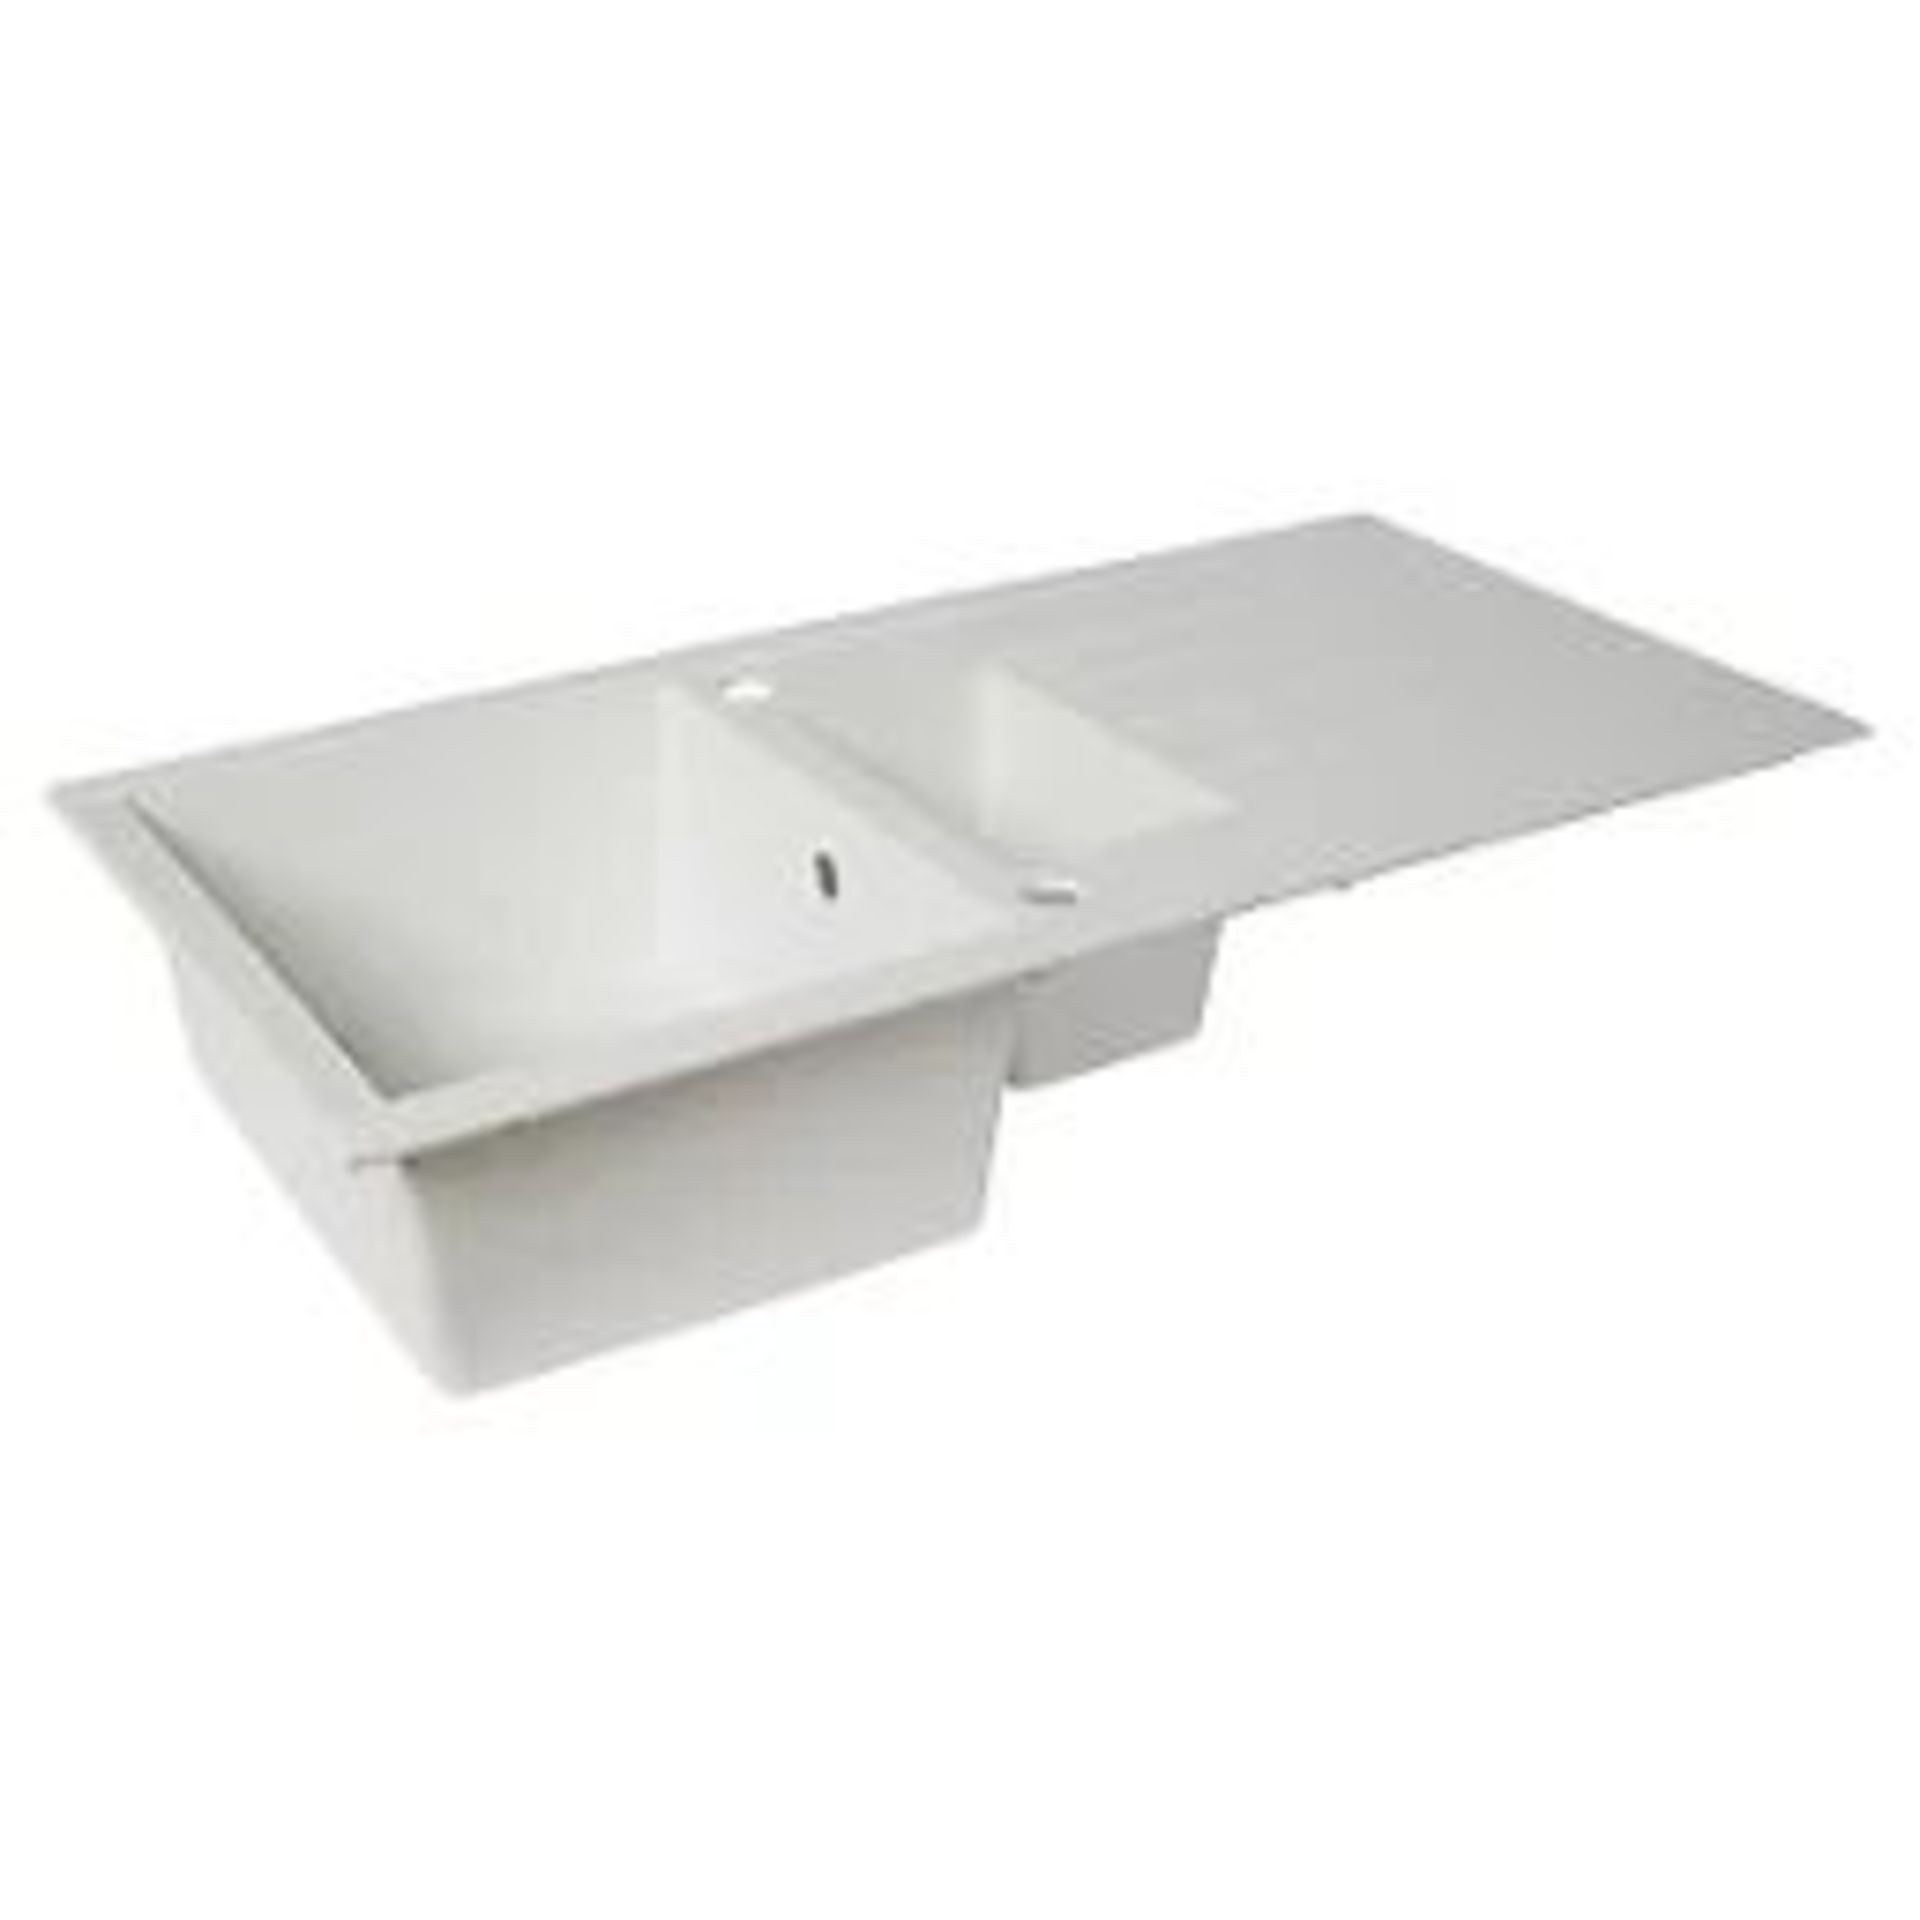 1.5 BOWL PLASTIC & RESIN KITCHEN SINK & DRAINER WHITE REVERSIBLE 1000MM X 500MM. - PW.